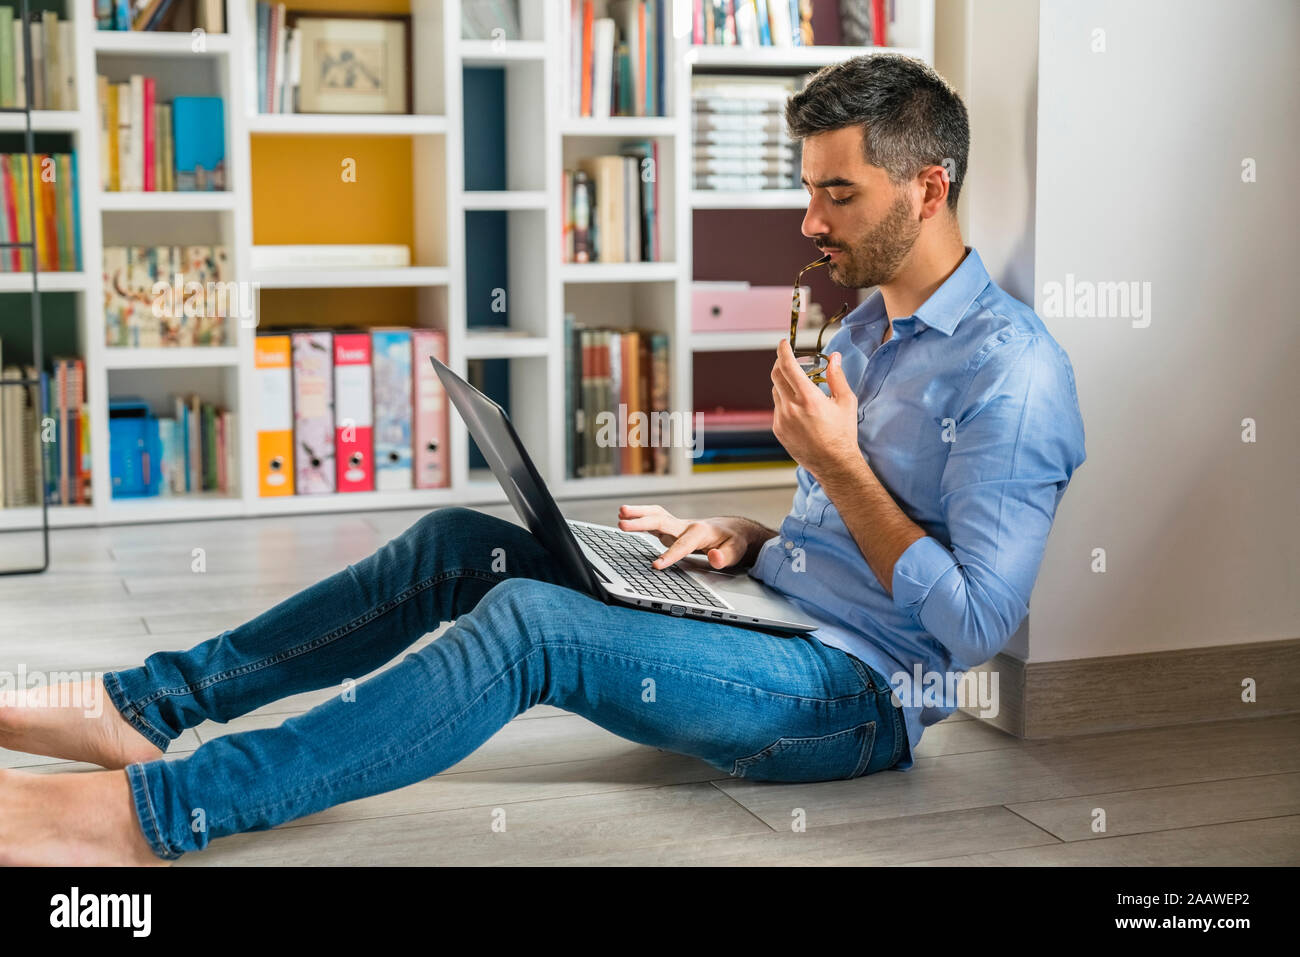 Young man sitting on the floor at home using laptop Stock Photo